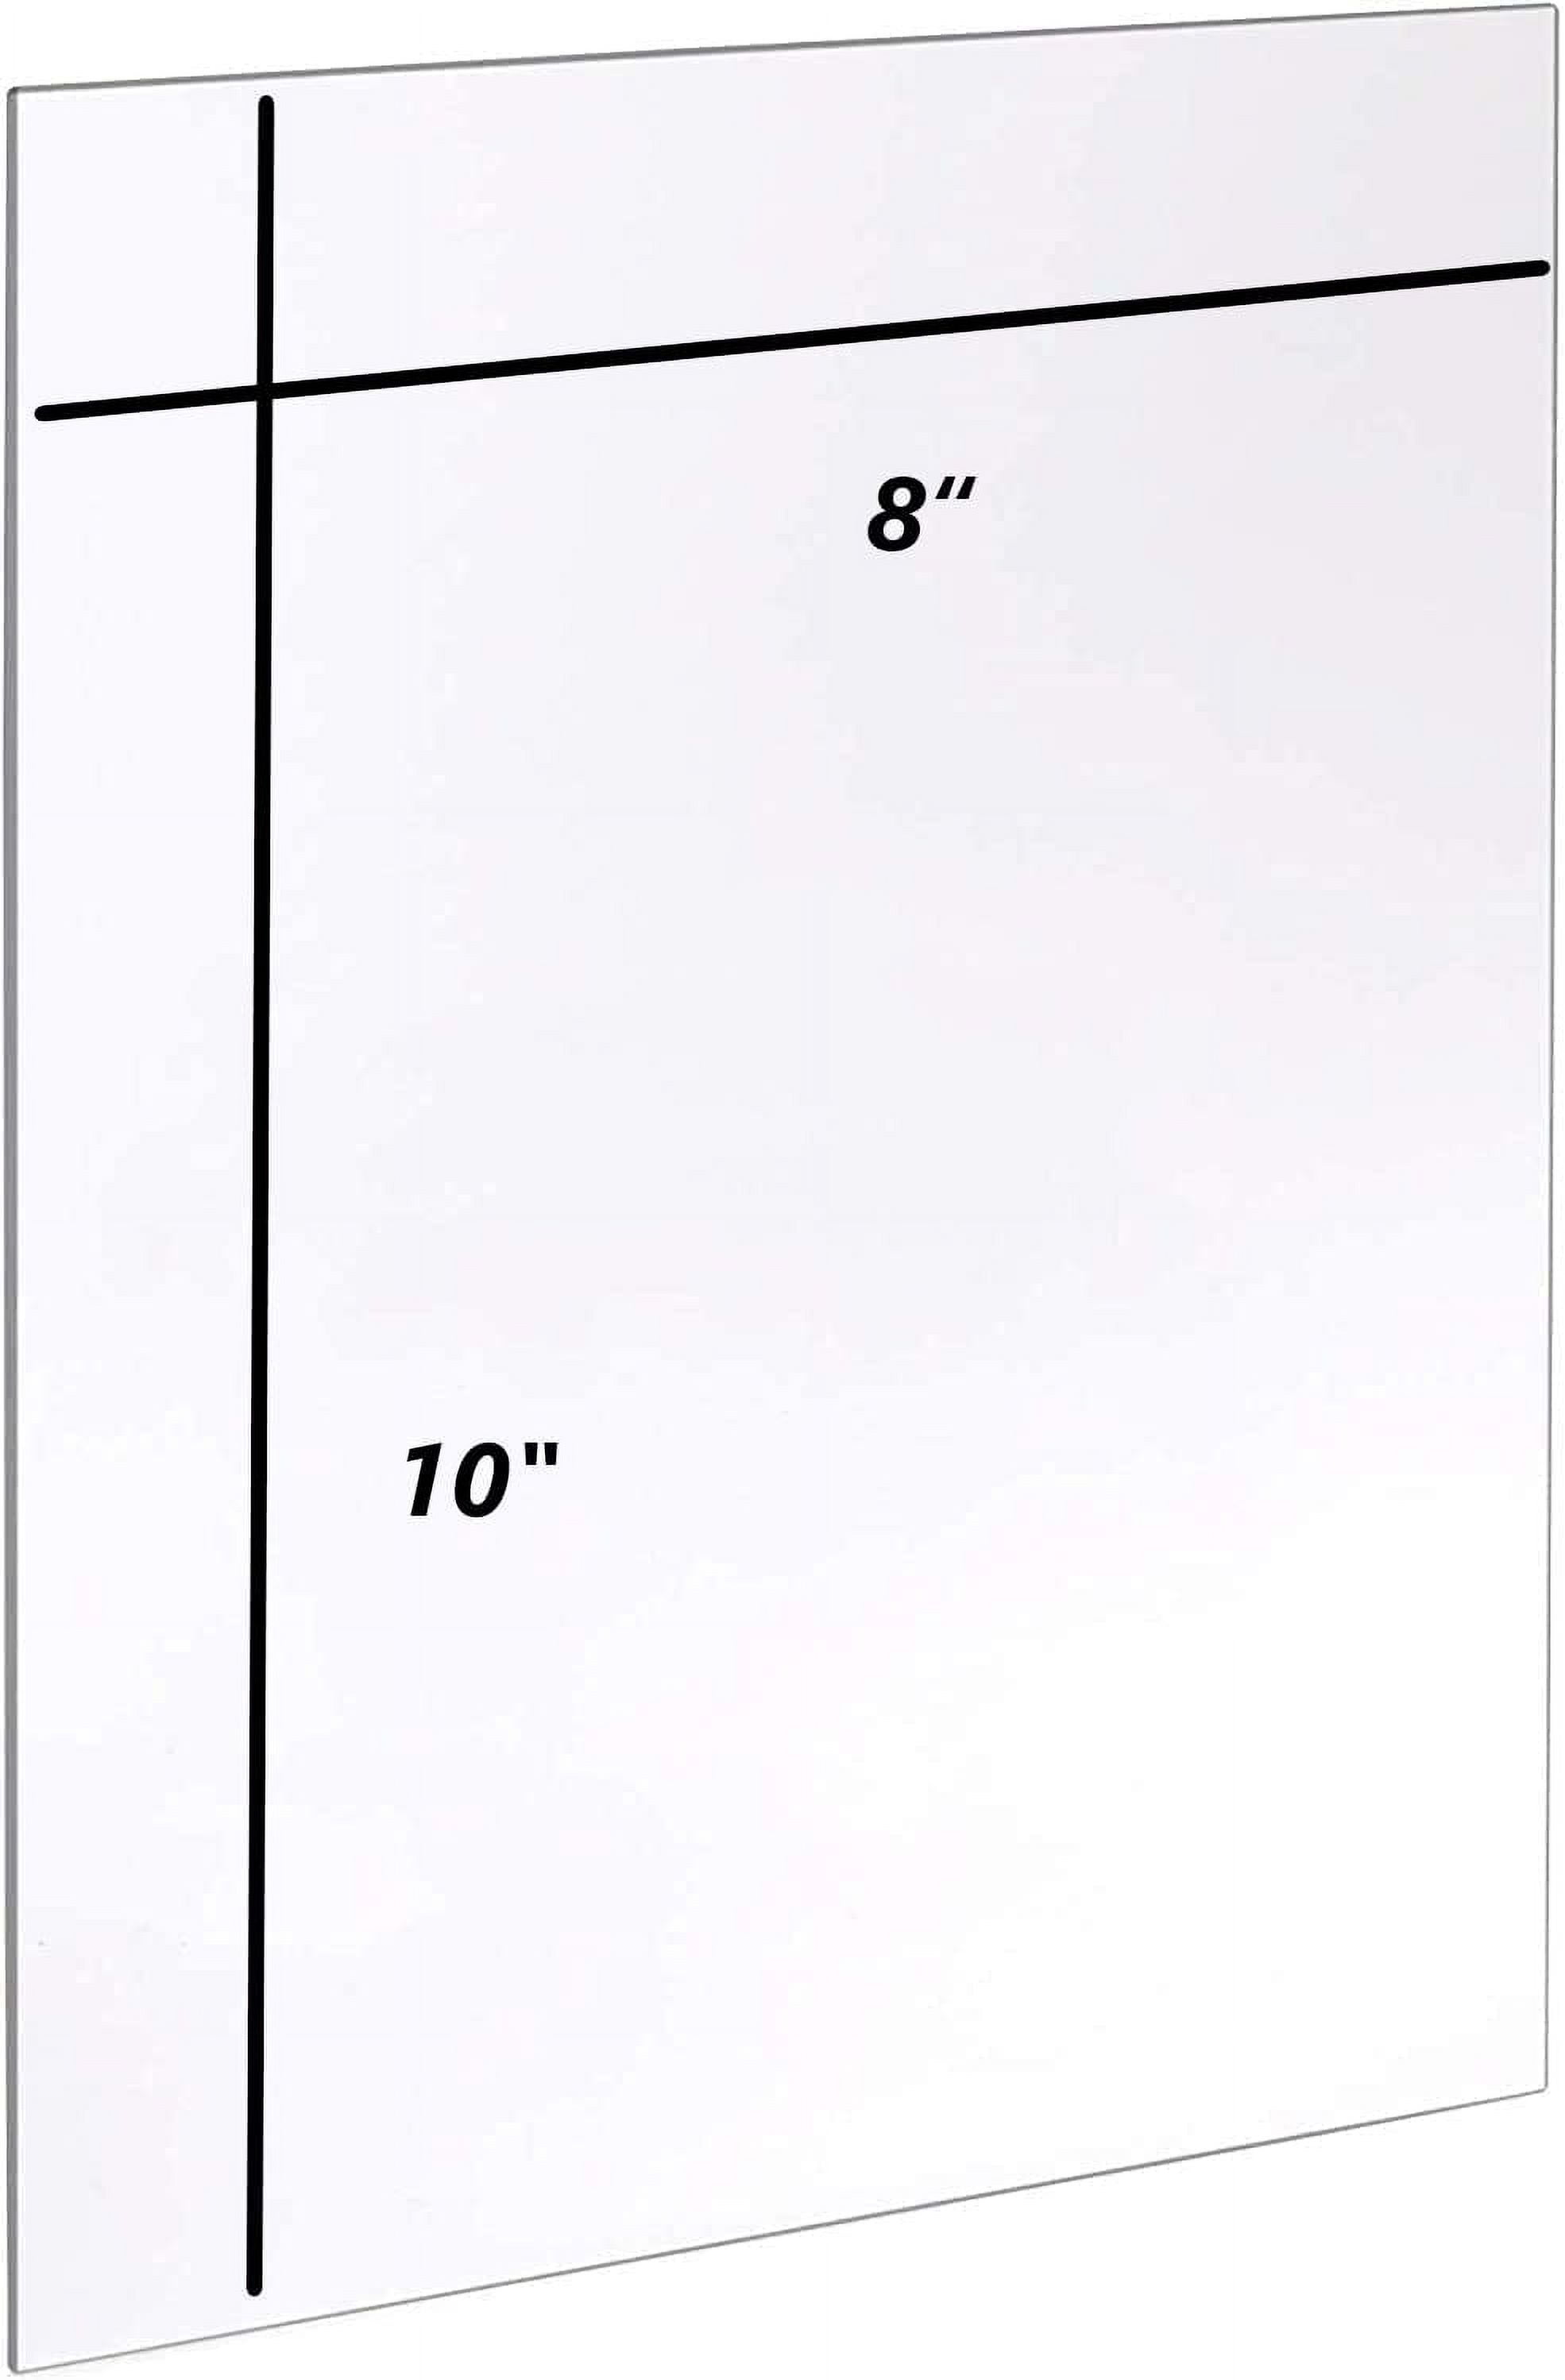 FrameStarr 11x14 Heat-Strengthened Glass, Crystal Clear, Shatterproof &  Scratch Proof Picture Frame Replacement Glass, Semi-Tempered Glass Cover  Sheet